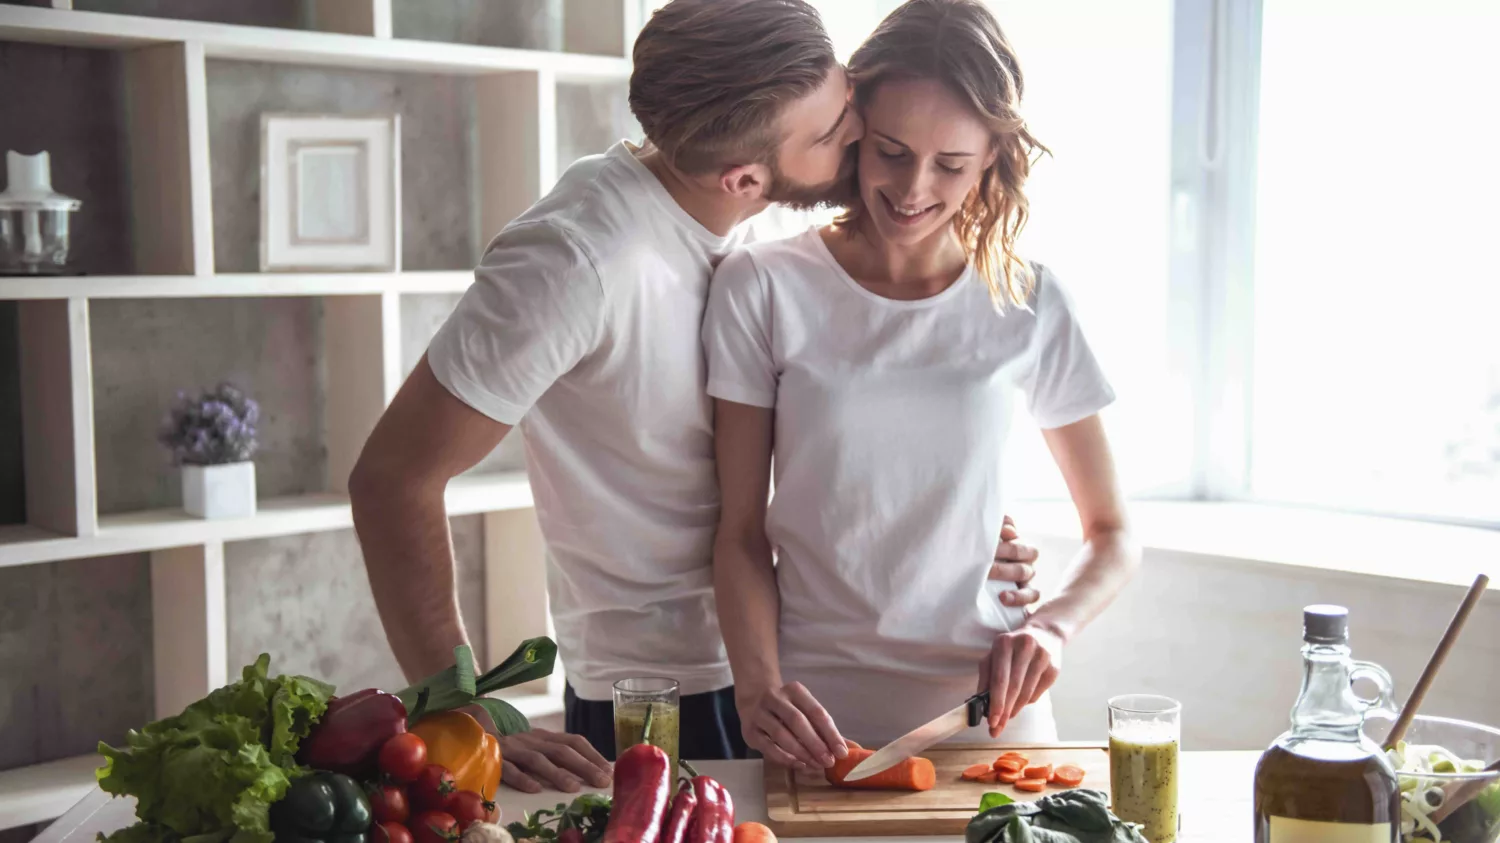 Surprise your partner with a special and healthy meal